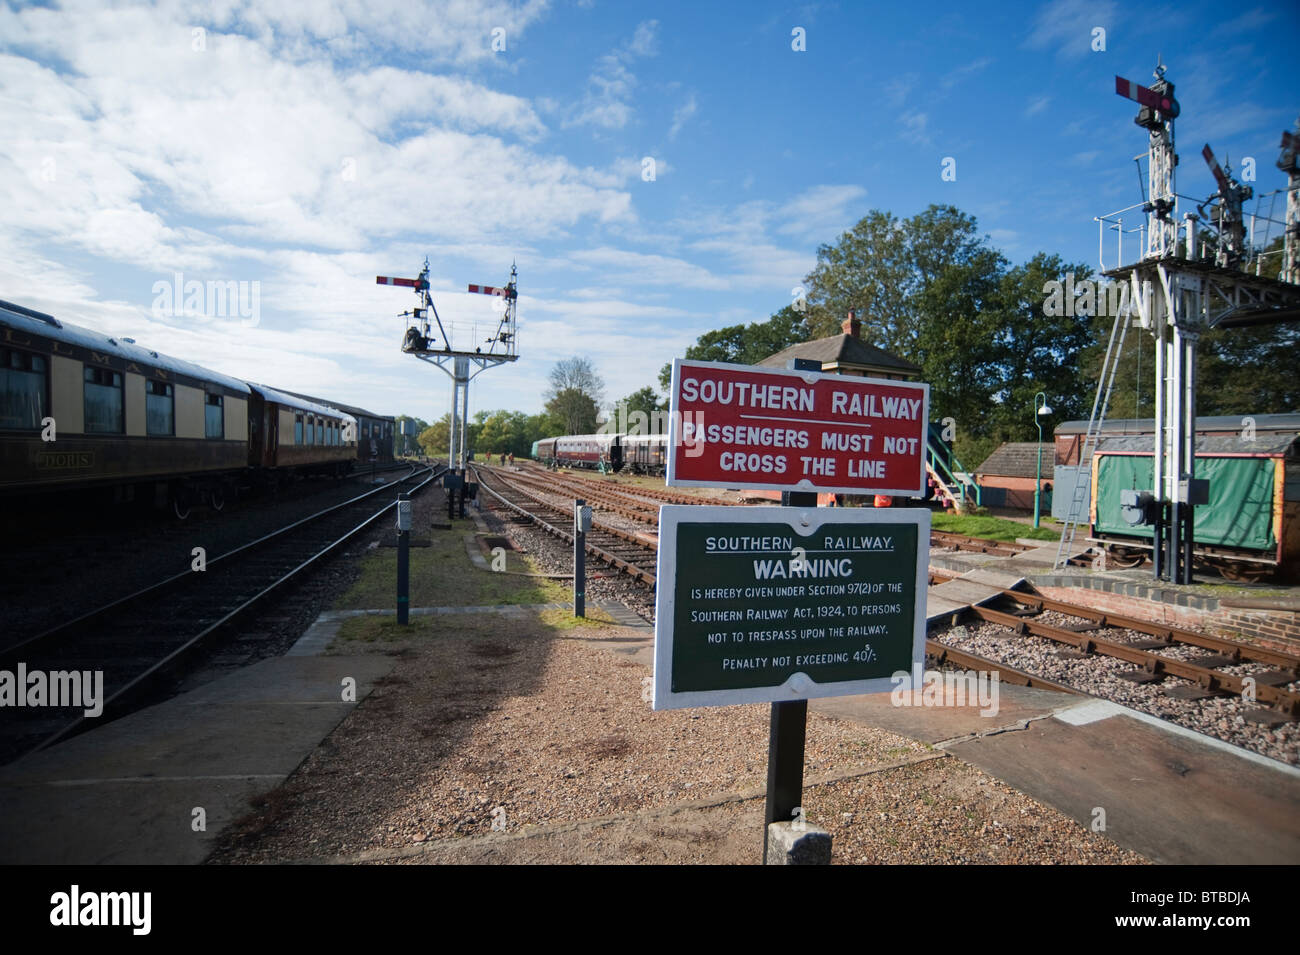 Semaphore Signals and Signs, Bluebell Railway, Sussex, England Stock Photo